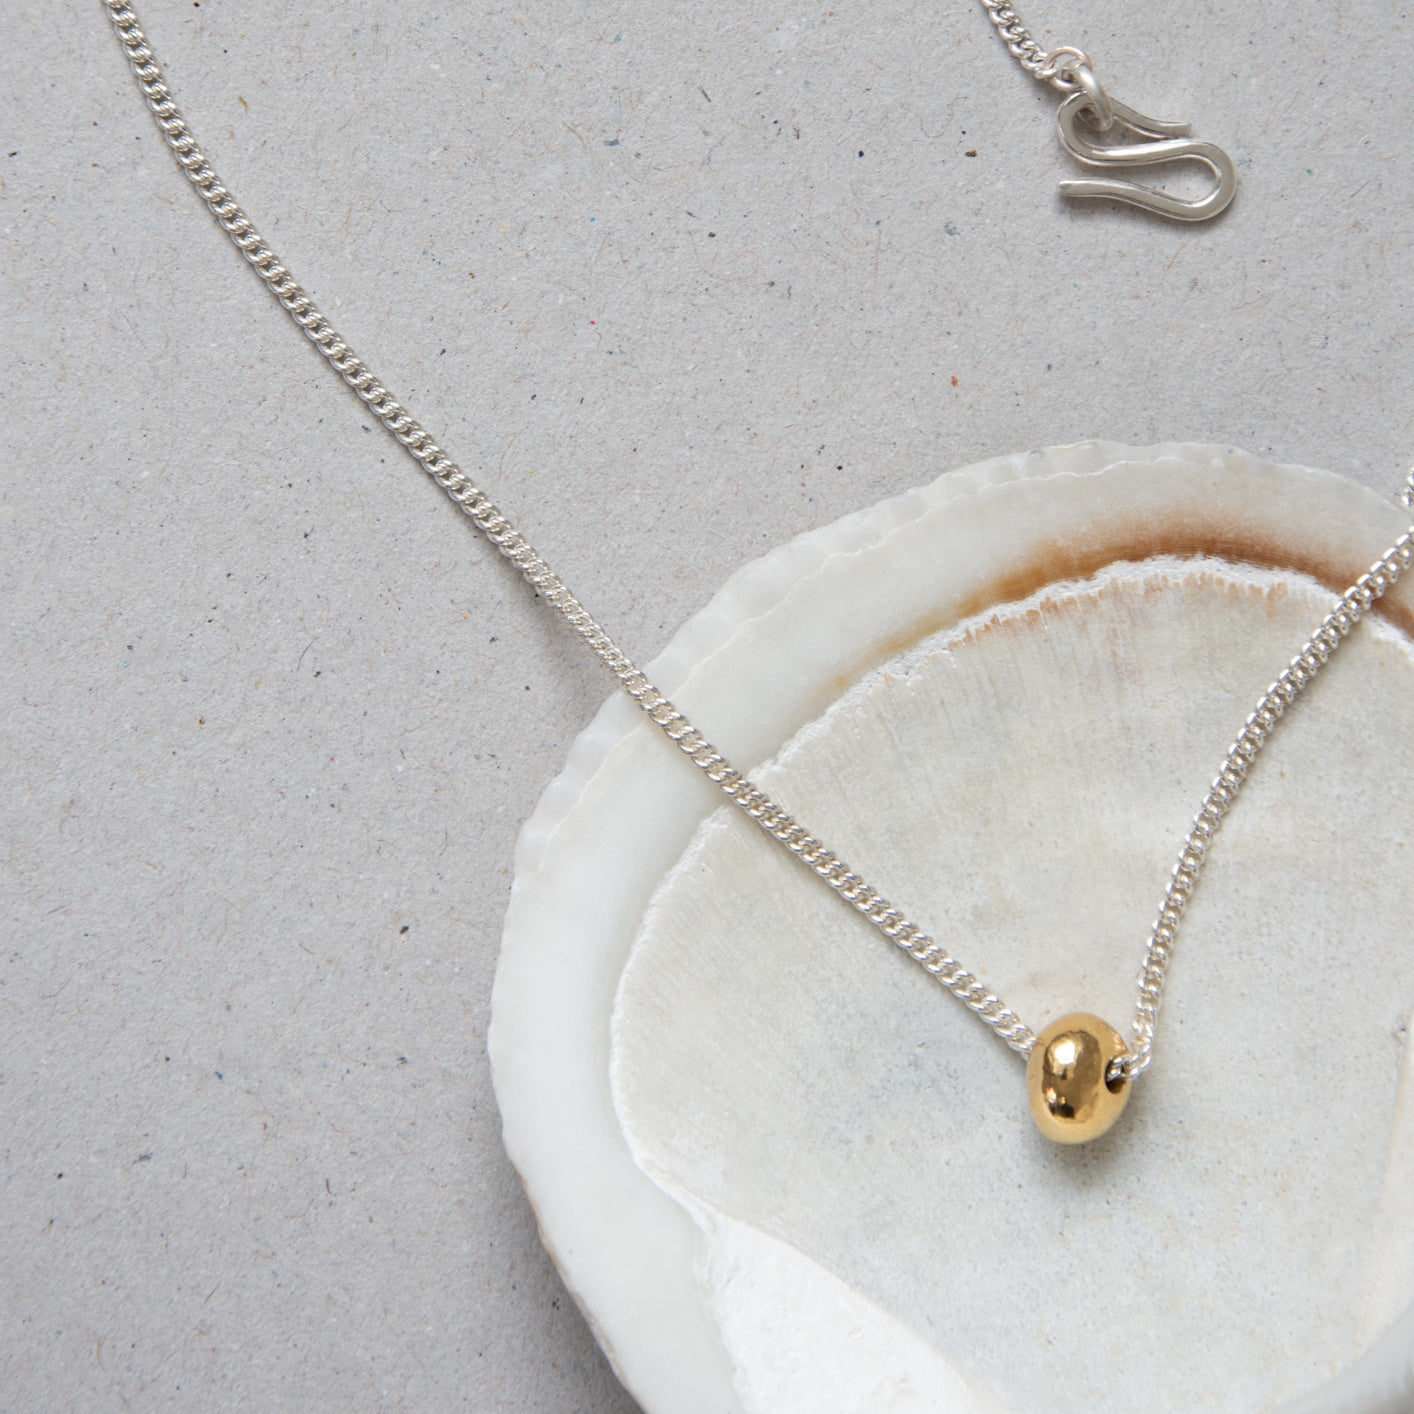 Single Seed Necklace